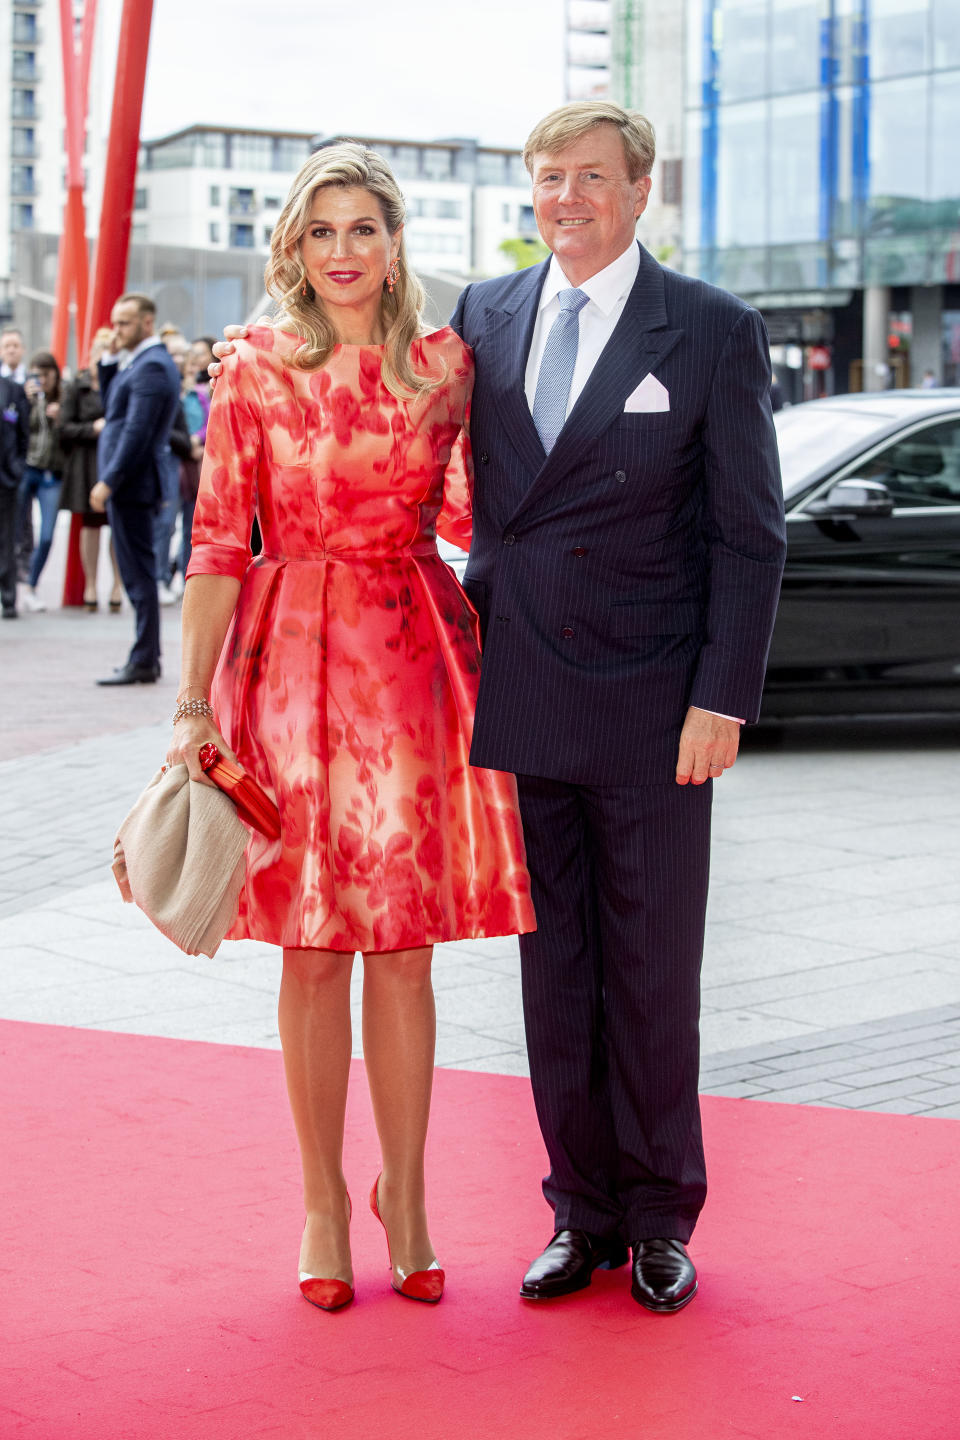 DUBLIN, IRELAND - JUNE 13: King Willem-Alexander of The Netherlands and Queen Maxima of The Netherlands on June 13, 2019 in Dublin, Ireland. The King and Queen of The Netherlands are in Ireland for an three day state visit. (Photo by Patrick van Katwijk/Getty Images)